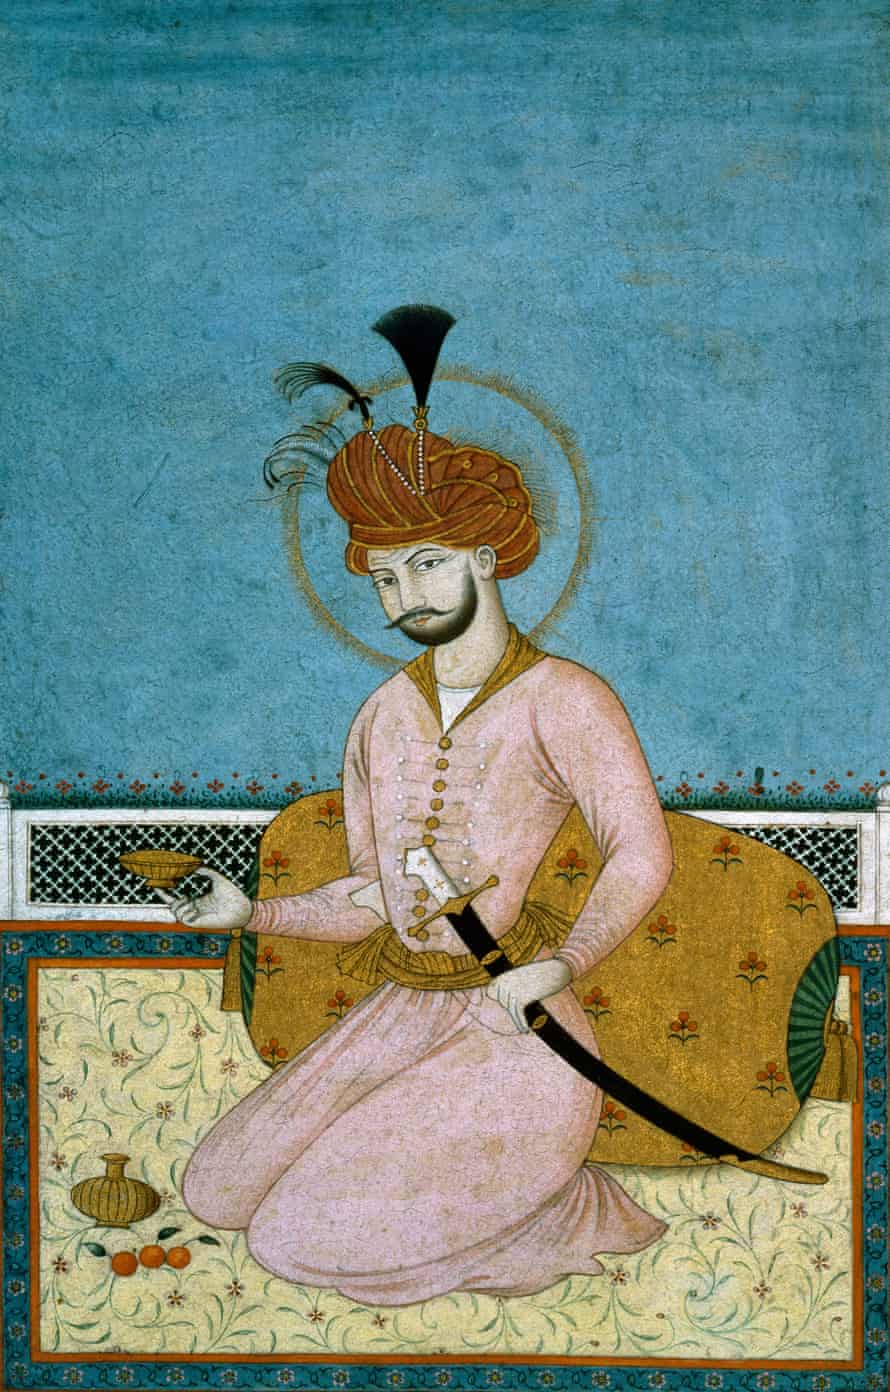 Portrait of Shah Abbas, Iran, 17th century, who was the 5th Safavid Shah. The Safavids descended from Sheikh Safi, a Sufi who had died in 1334.